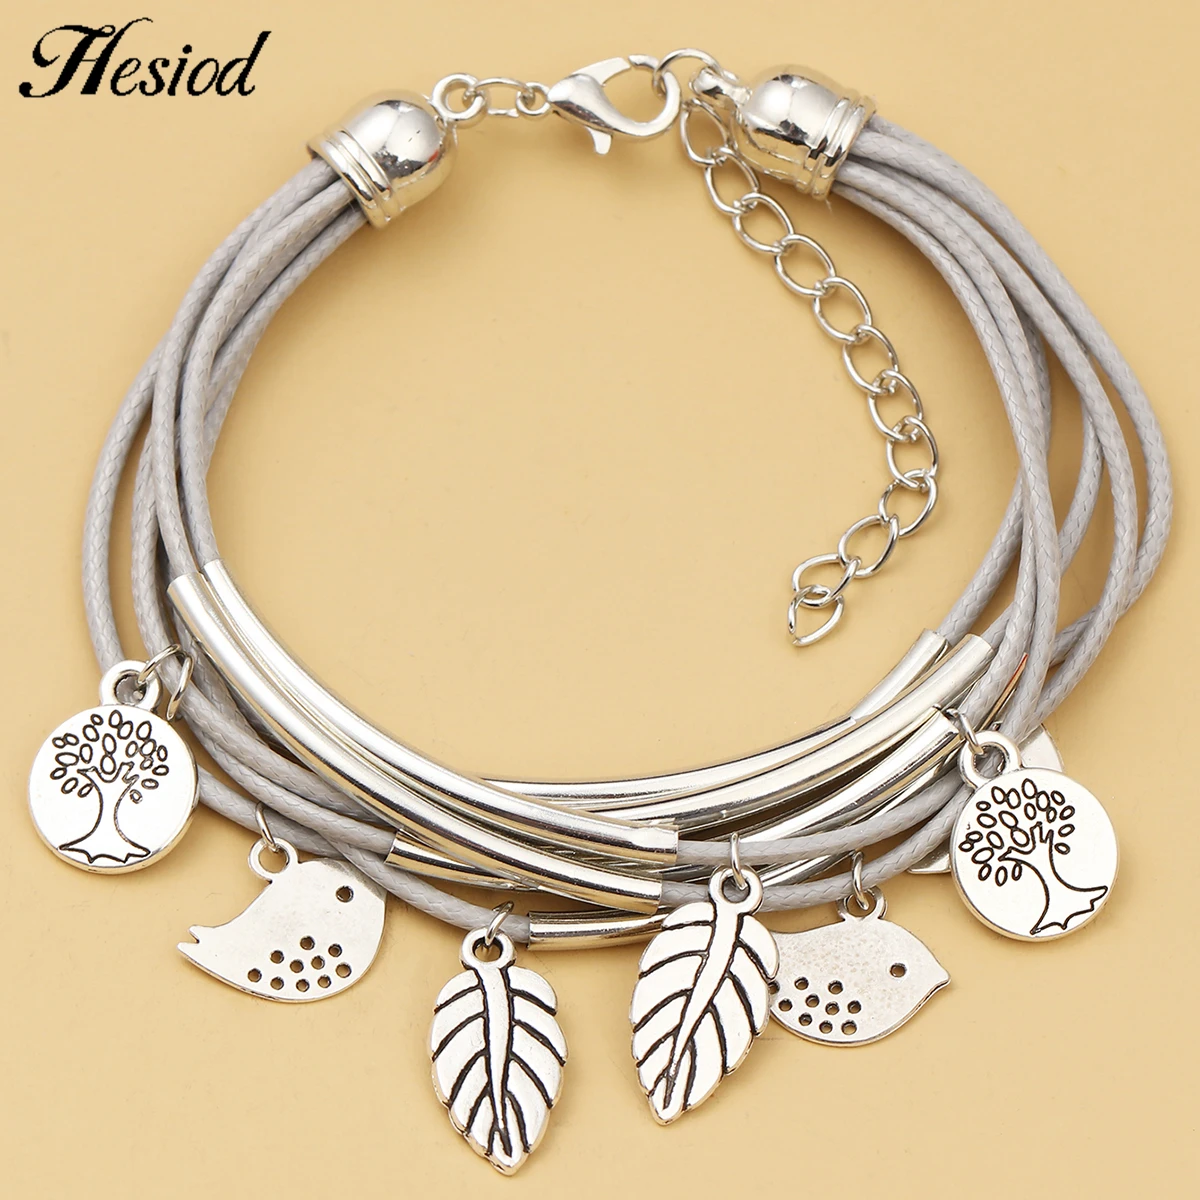 

4 Styles Hot Peace Tree Leaf Bird Multi layered Rope Chain Bracelet For Women Men Female Male Jewerly Party Accessories Gift